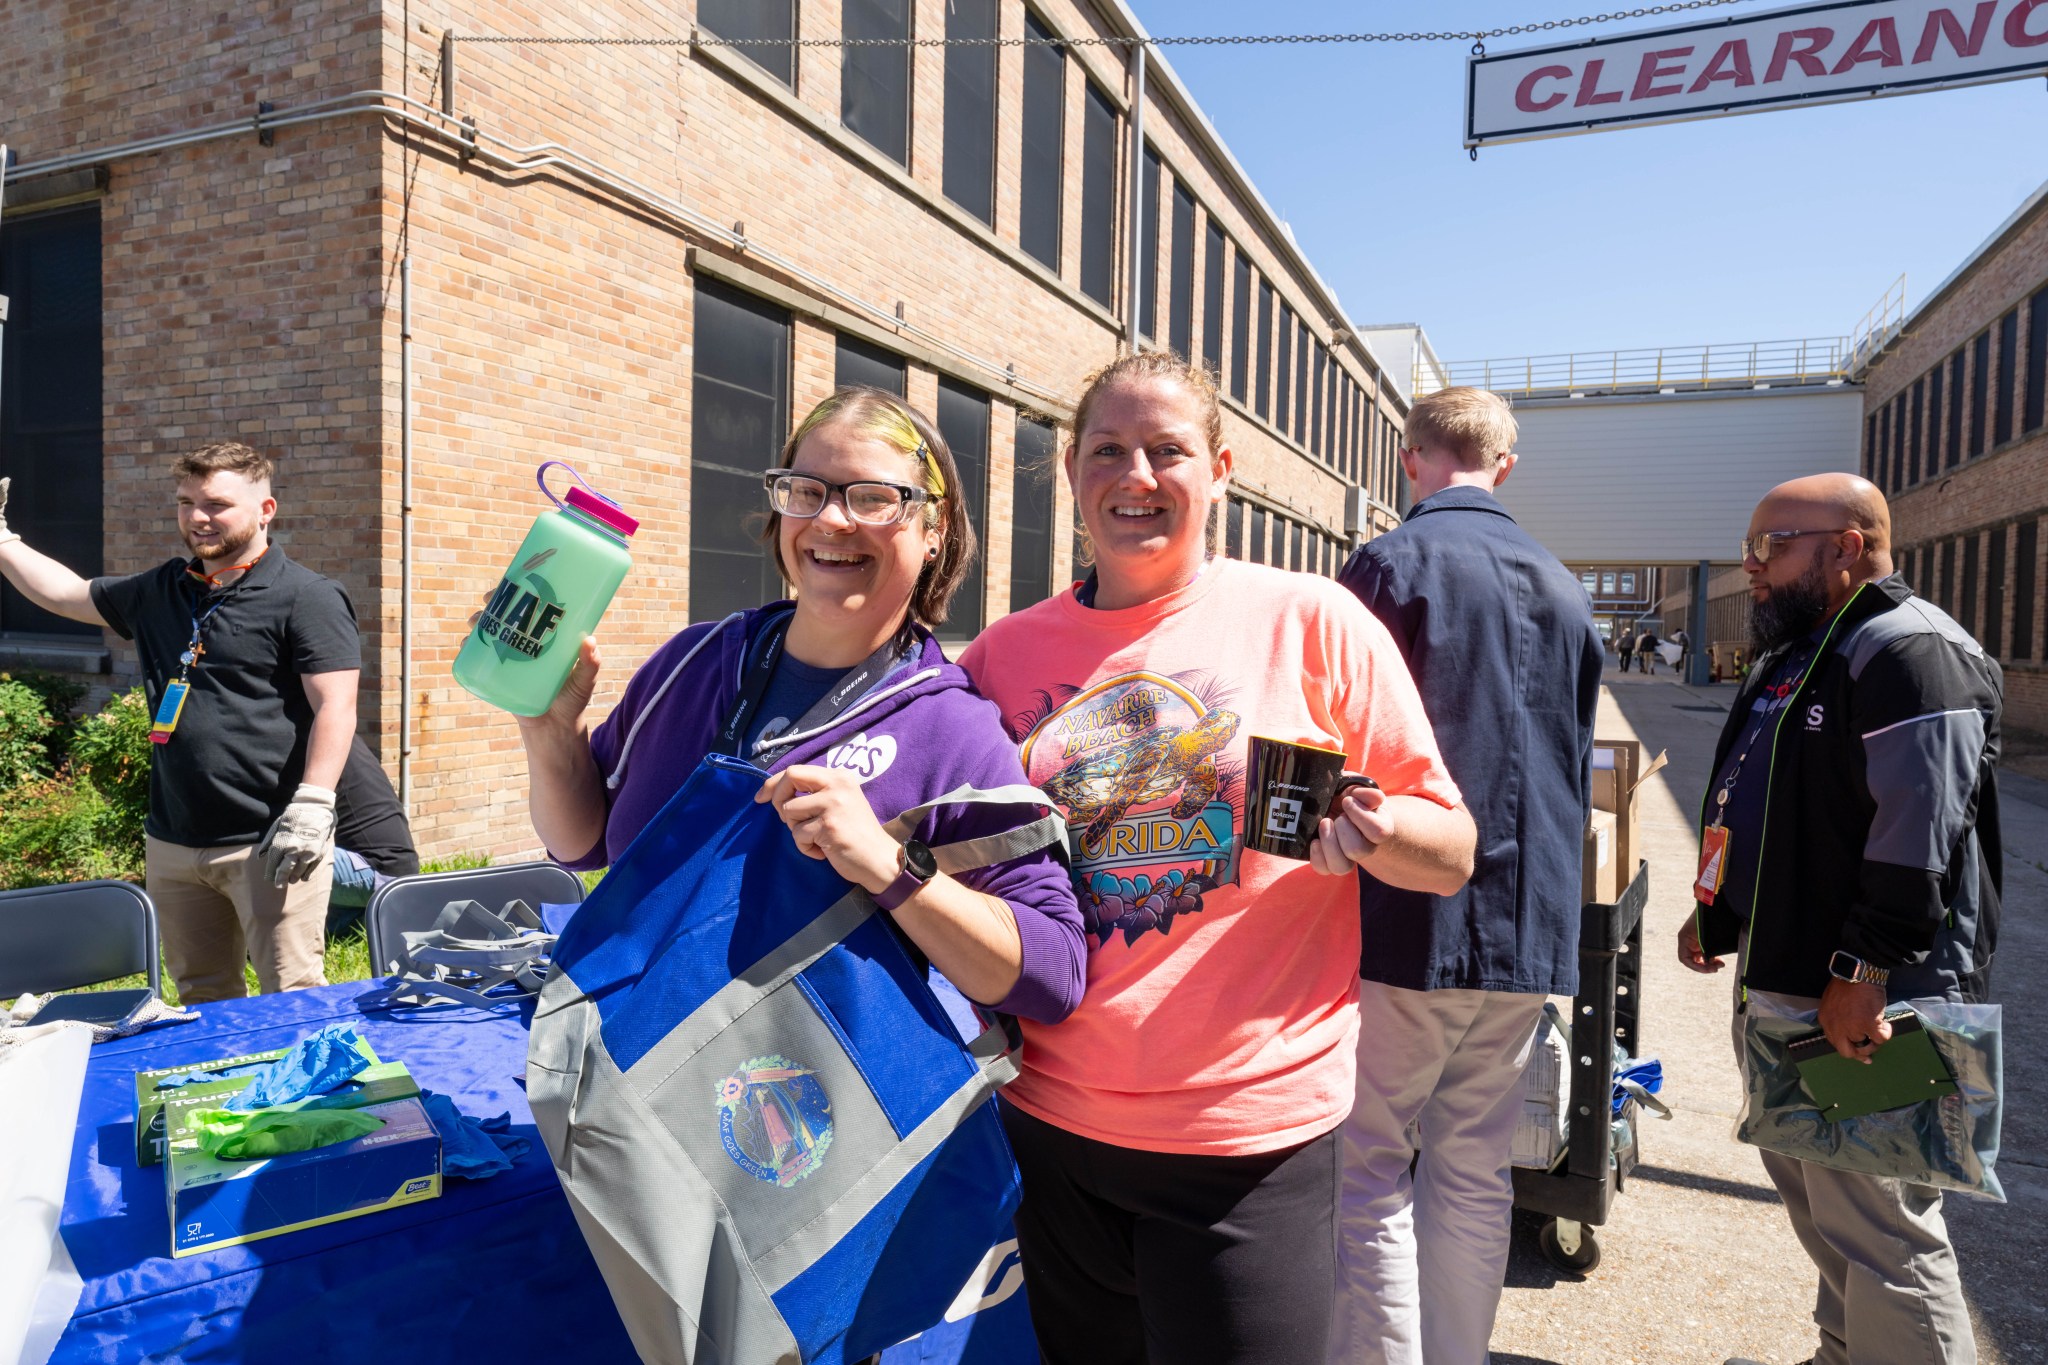 Crystal Farmer, left, and Jennifer York of Boeing show off “MAF Goes Green” giveaways handed out during the April 22 cleanup activities.